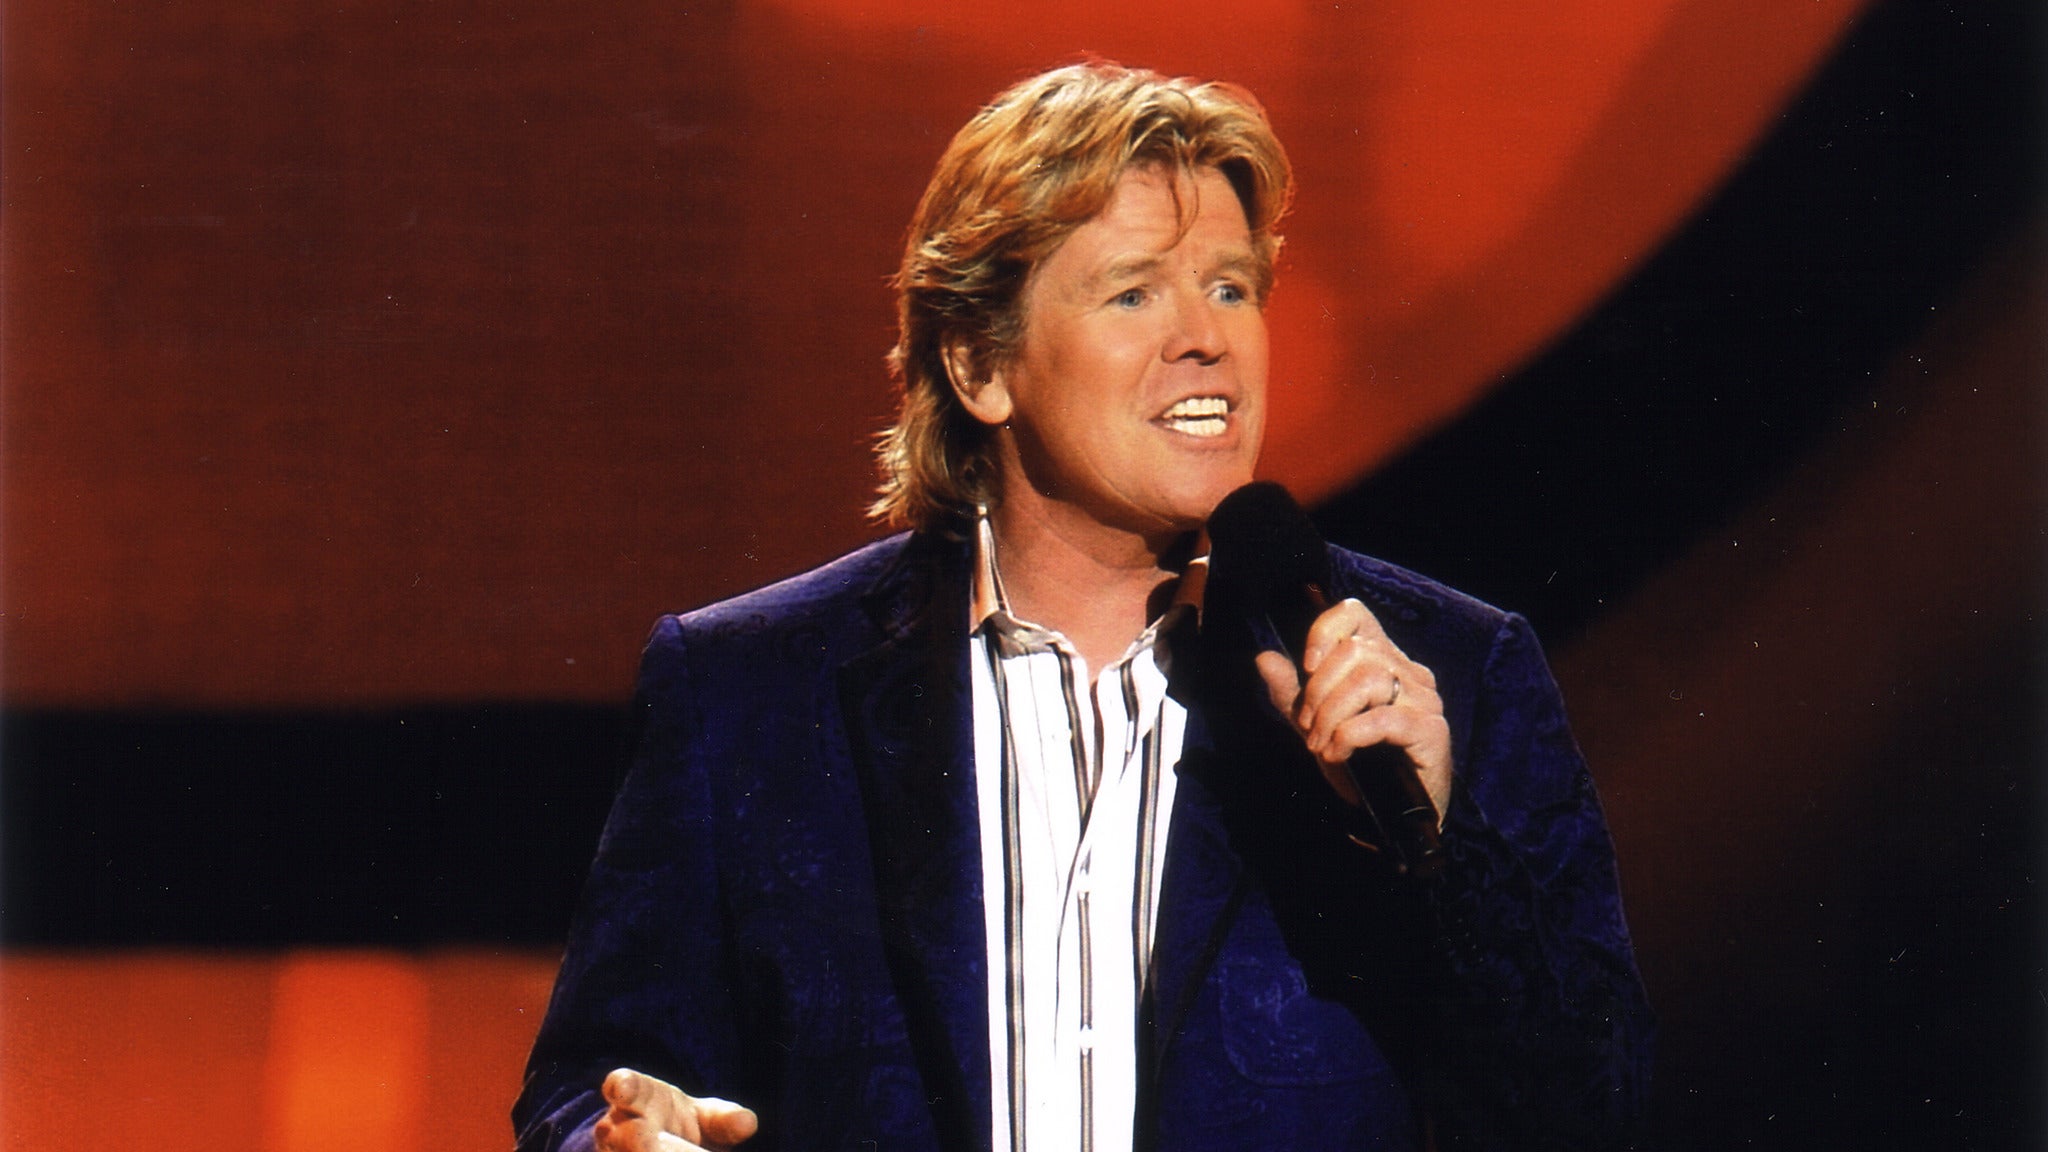 Image used with permission from Ticketmaster | Hermans Hermits tickets